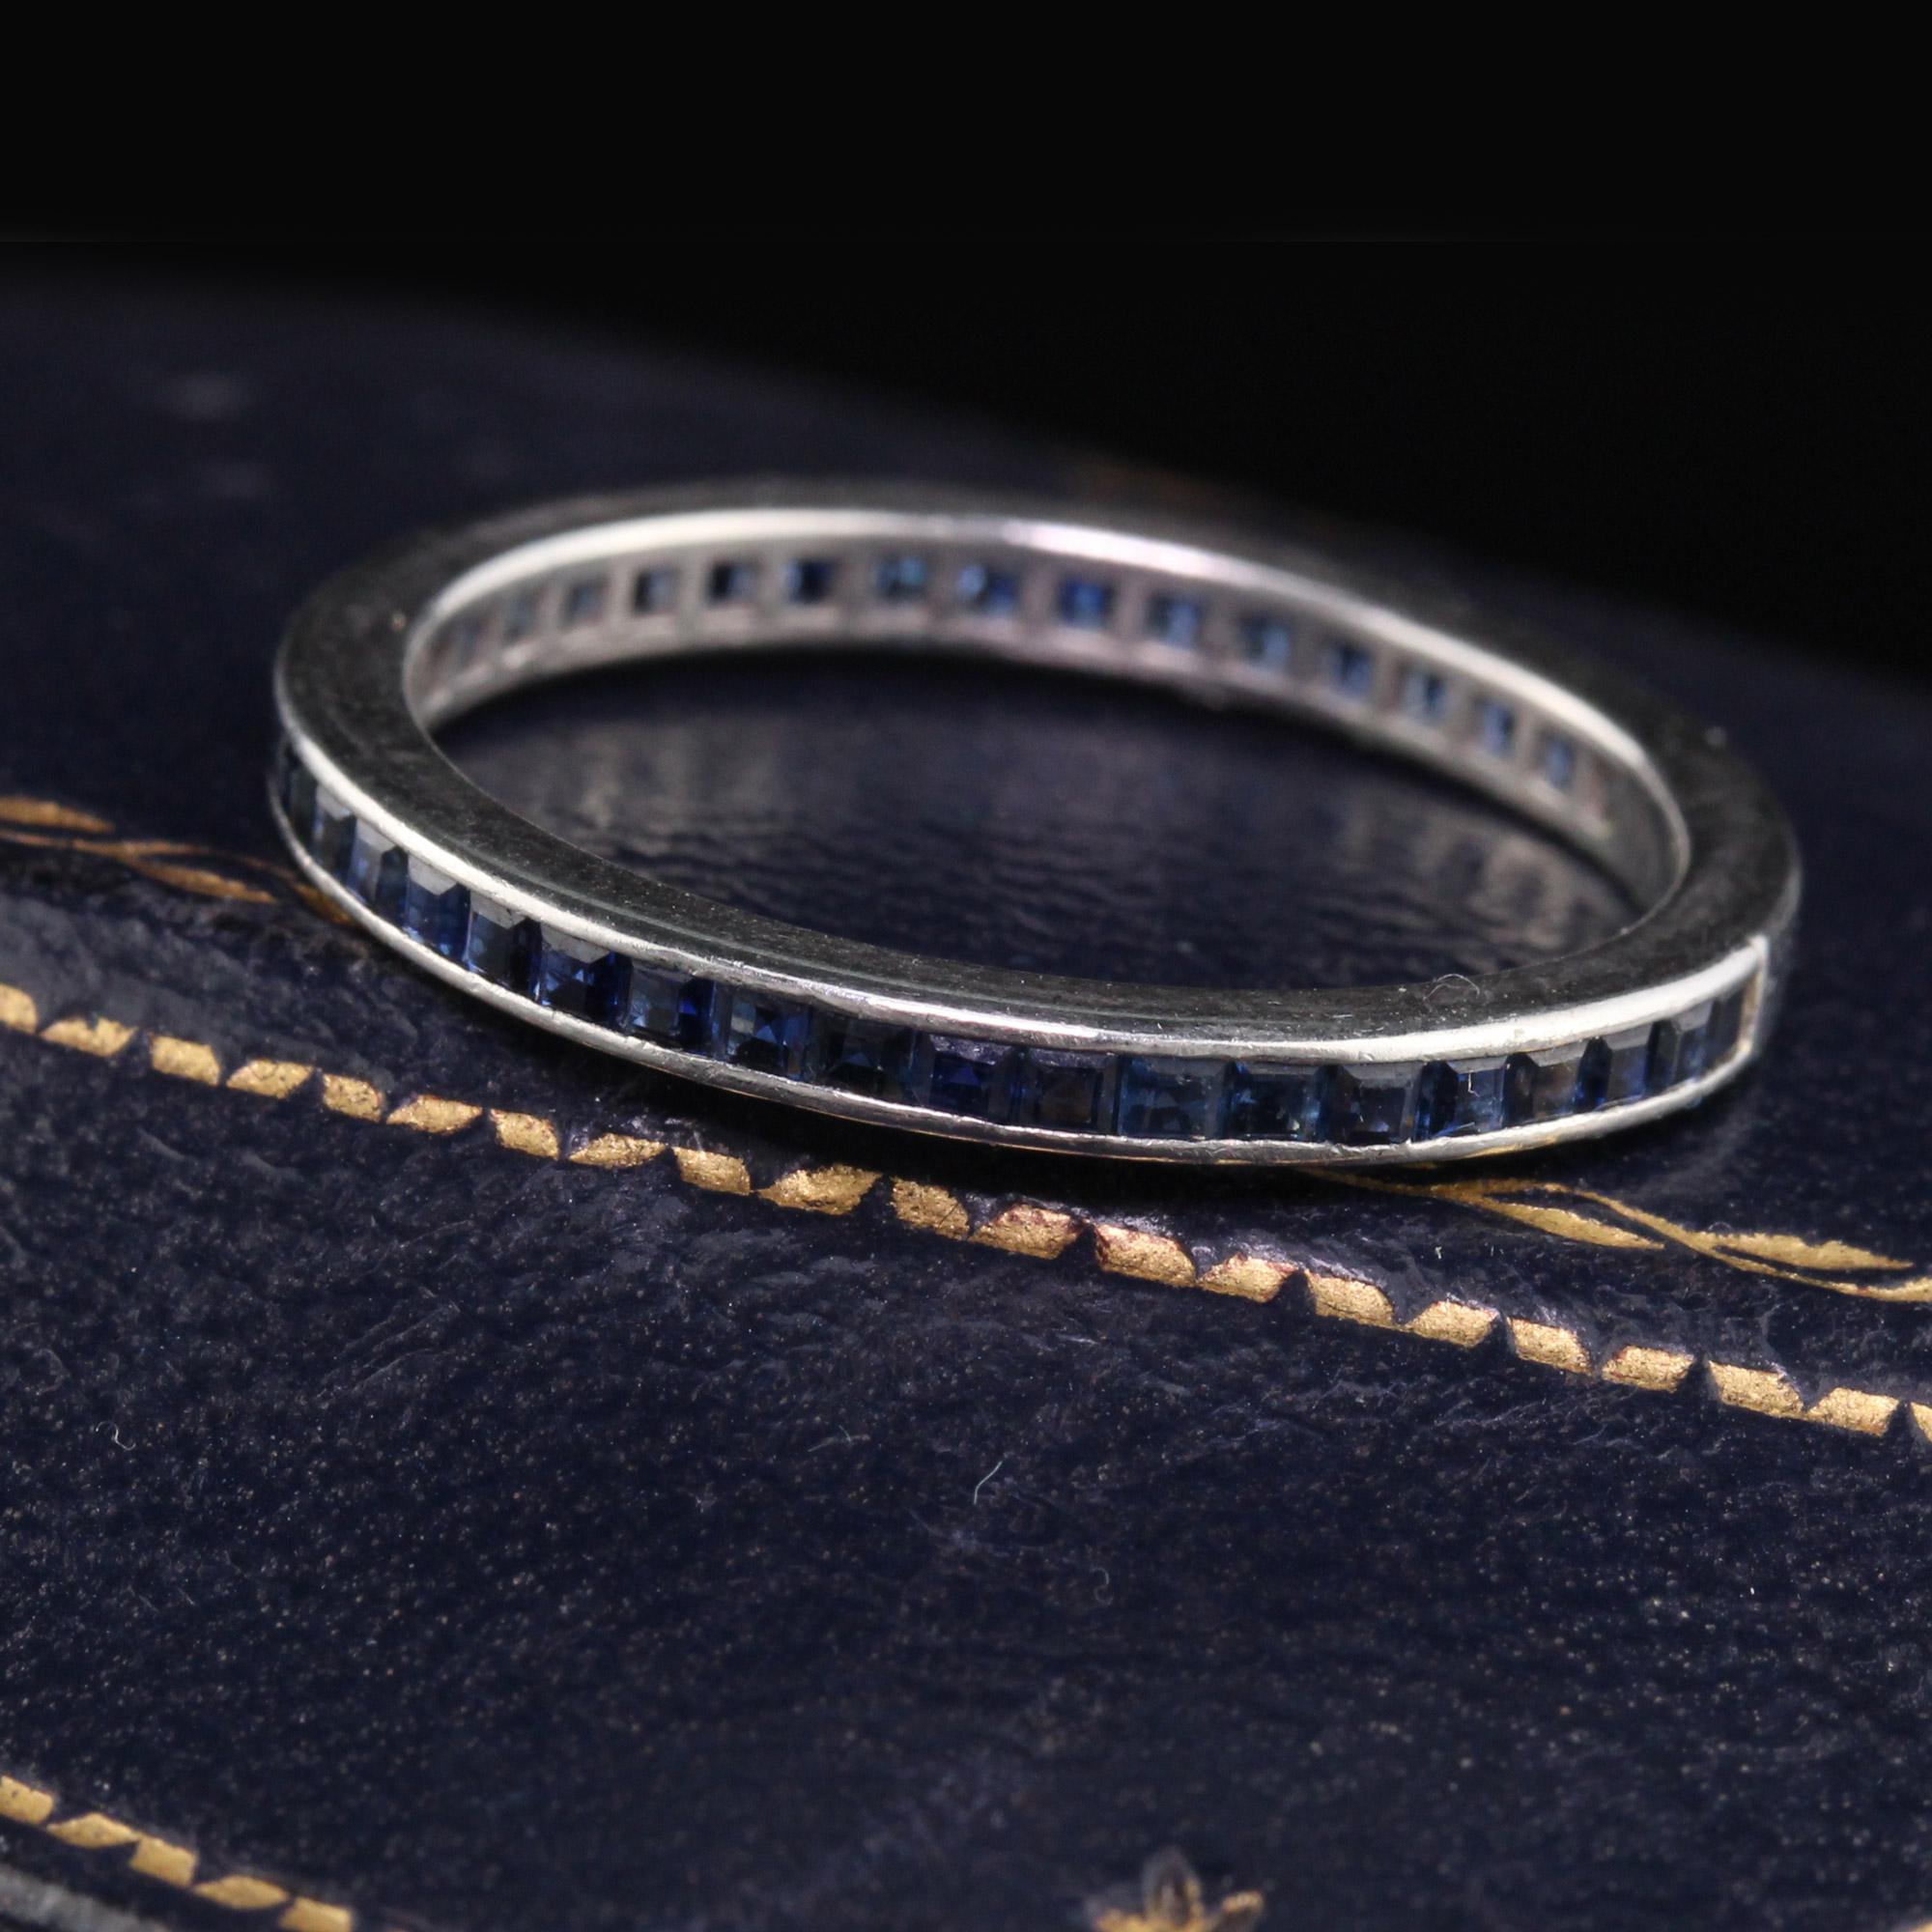 Beautiful classic Art Deco eternity band done in platinum with sapphires. The ring is in very good condition. There is some space available to size the ring.

#R0253

Metal: Platinum 

Weight: 3.4 Grams

Ring Size: 8 (slightly sizable)

This ring